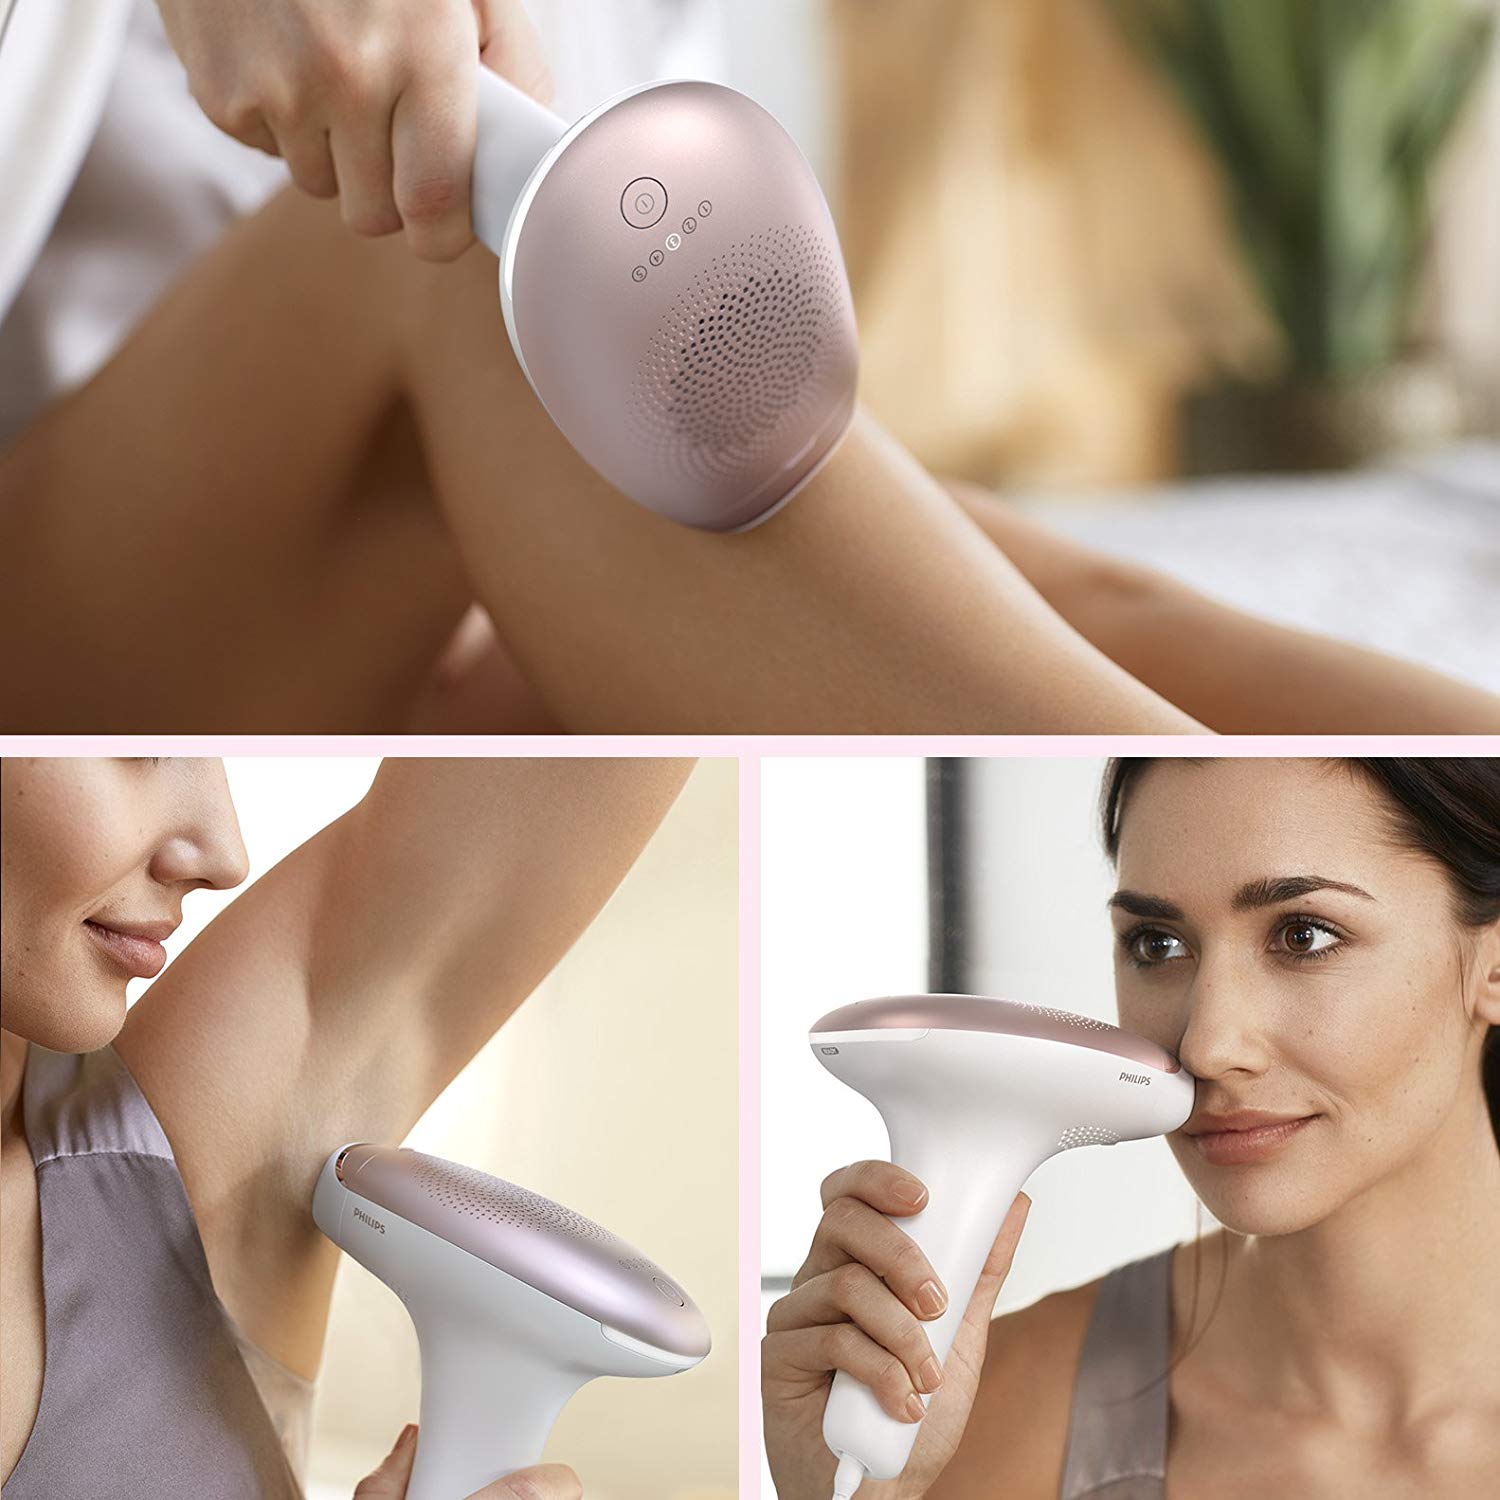 amount of sales Beg Normally Philips Lumea BRI921 Advanced IPL Hair Removal